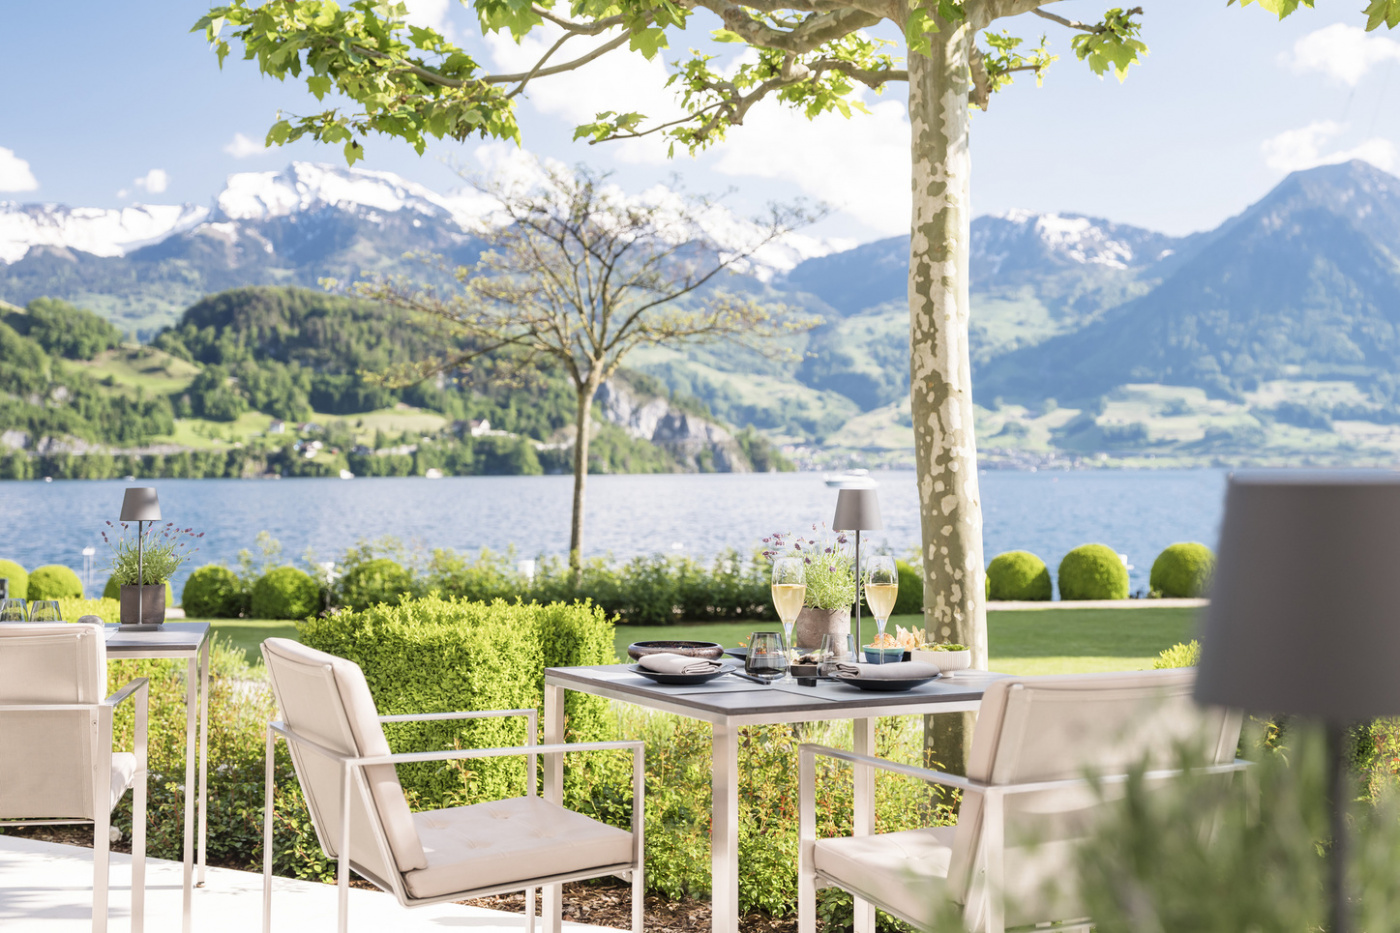 Cocktail with mountain view at luxury wedding venue on Lake Lucerne